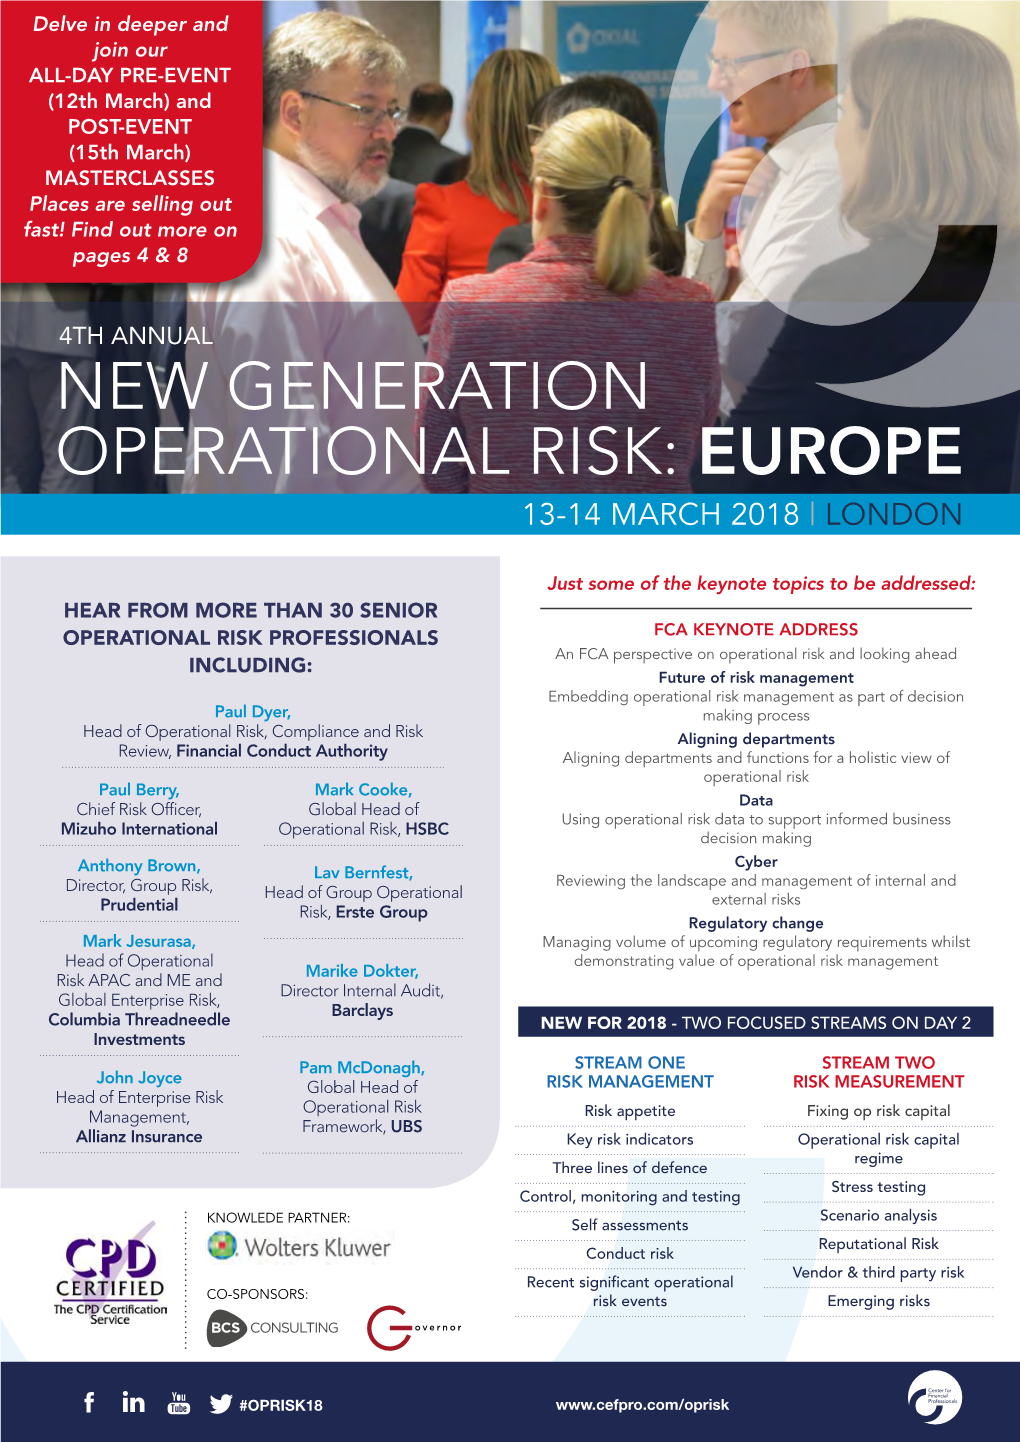 New Generation Operational Risk: Europe 13-14 March 2018 | London